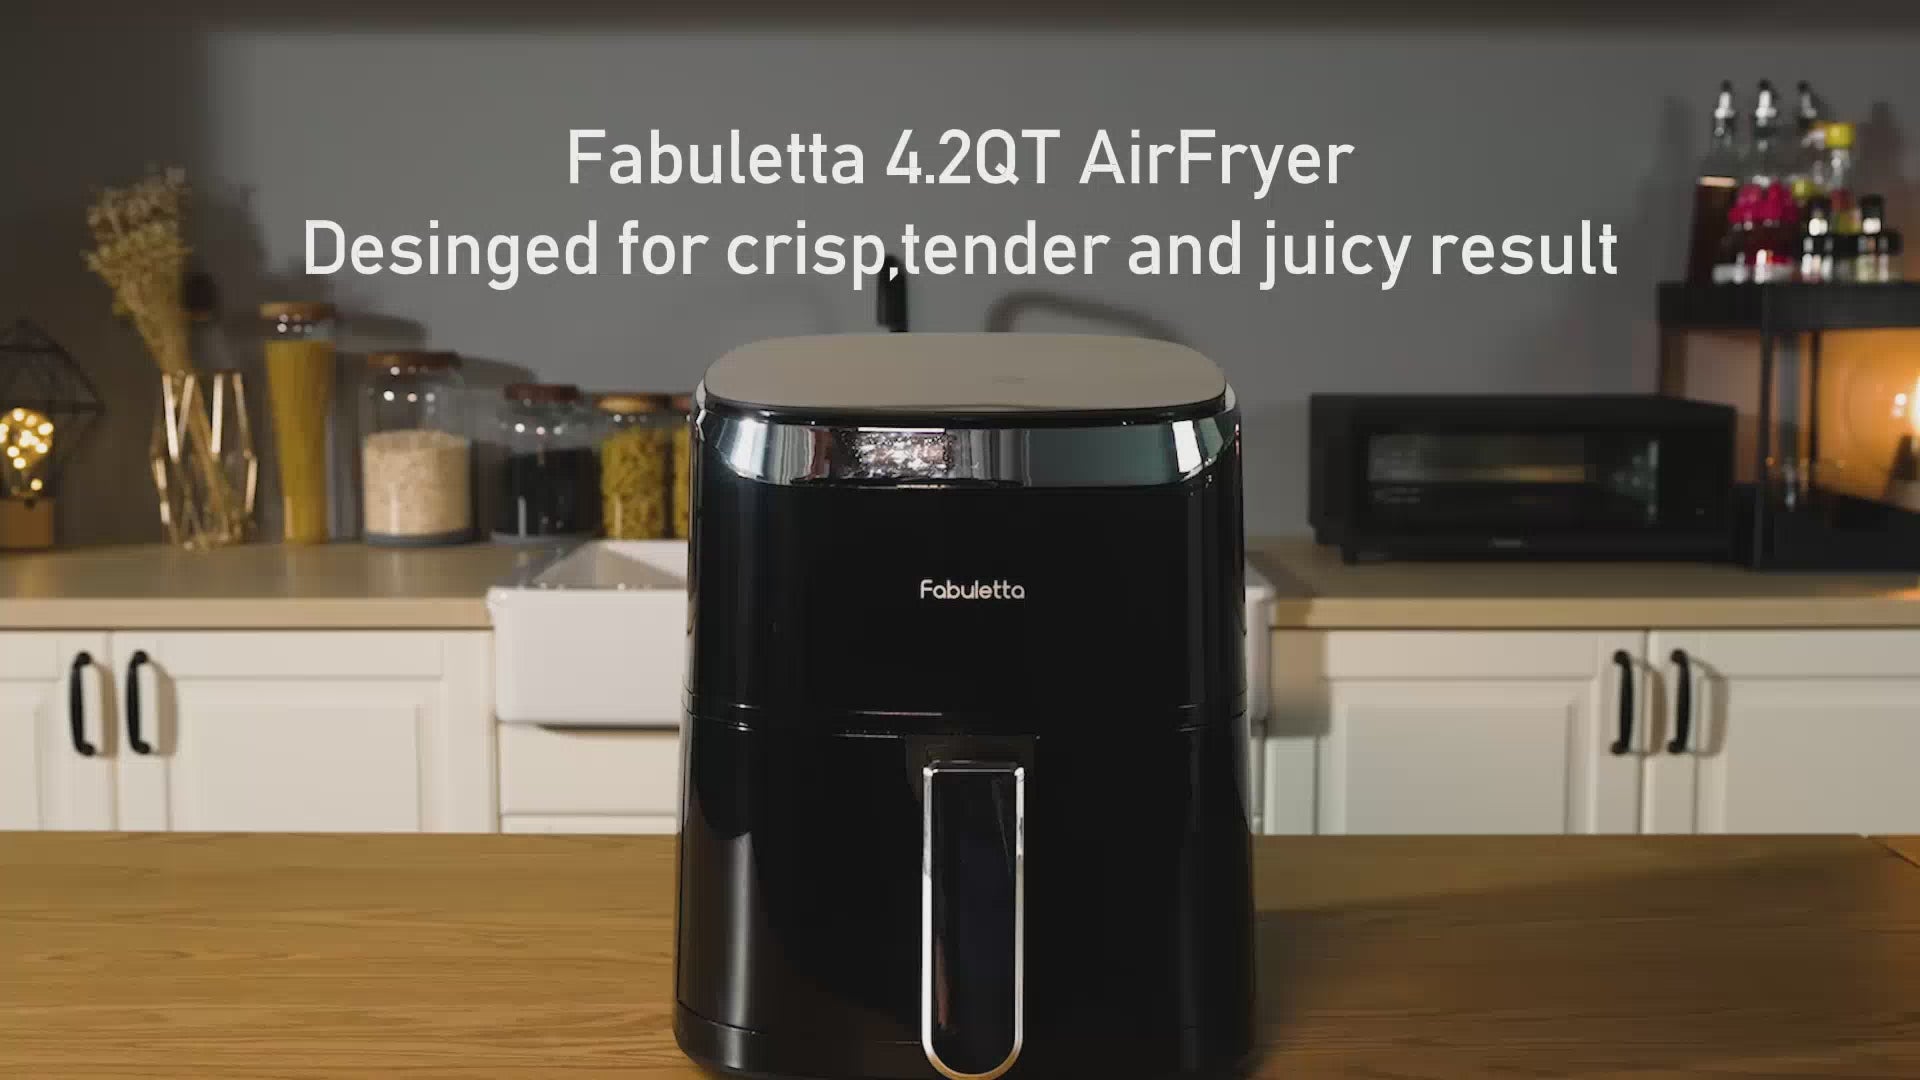 Air Fryer, Fabuletta 4.2 Qt Air Fryer Air Fryers With 9 Cooking Functions ,  Shake Reminder, Powerful 1550W Electric Hot Air Fryer Oilless Cooker,  Tempered Glass Display, Dishwasher-Safe & Nonstick 